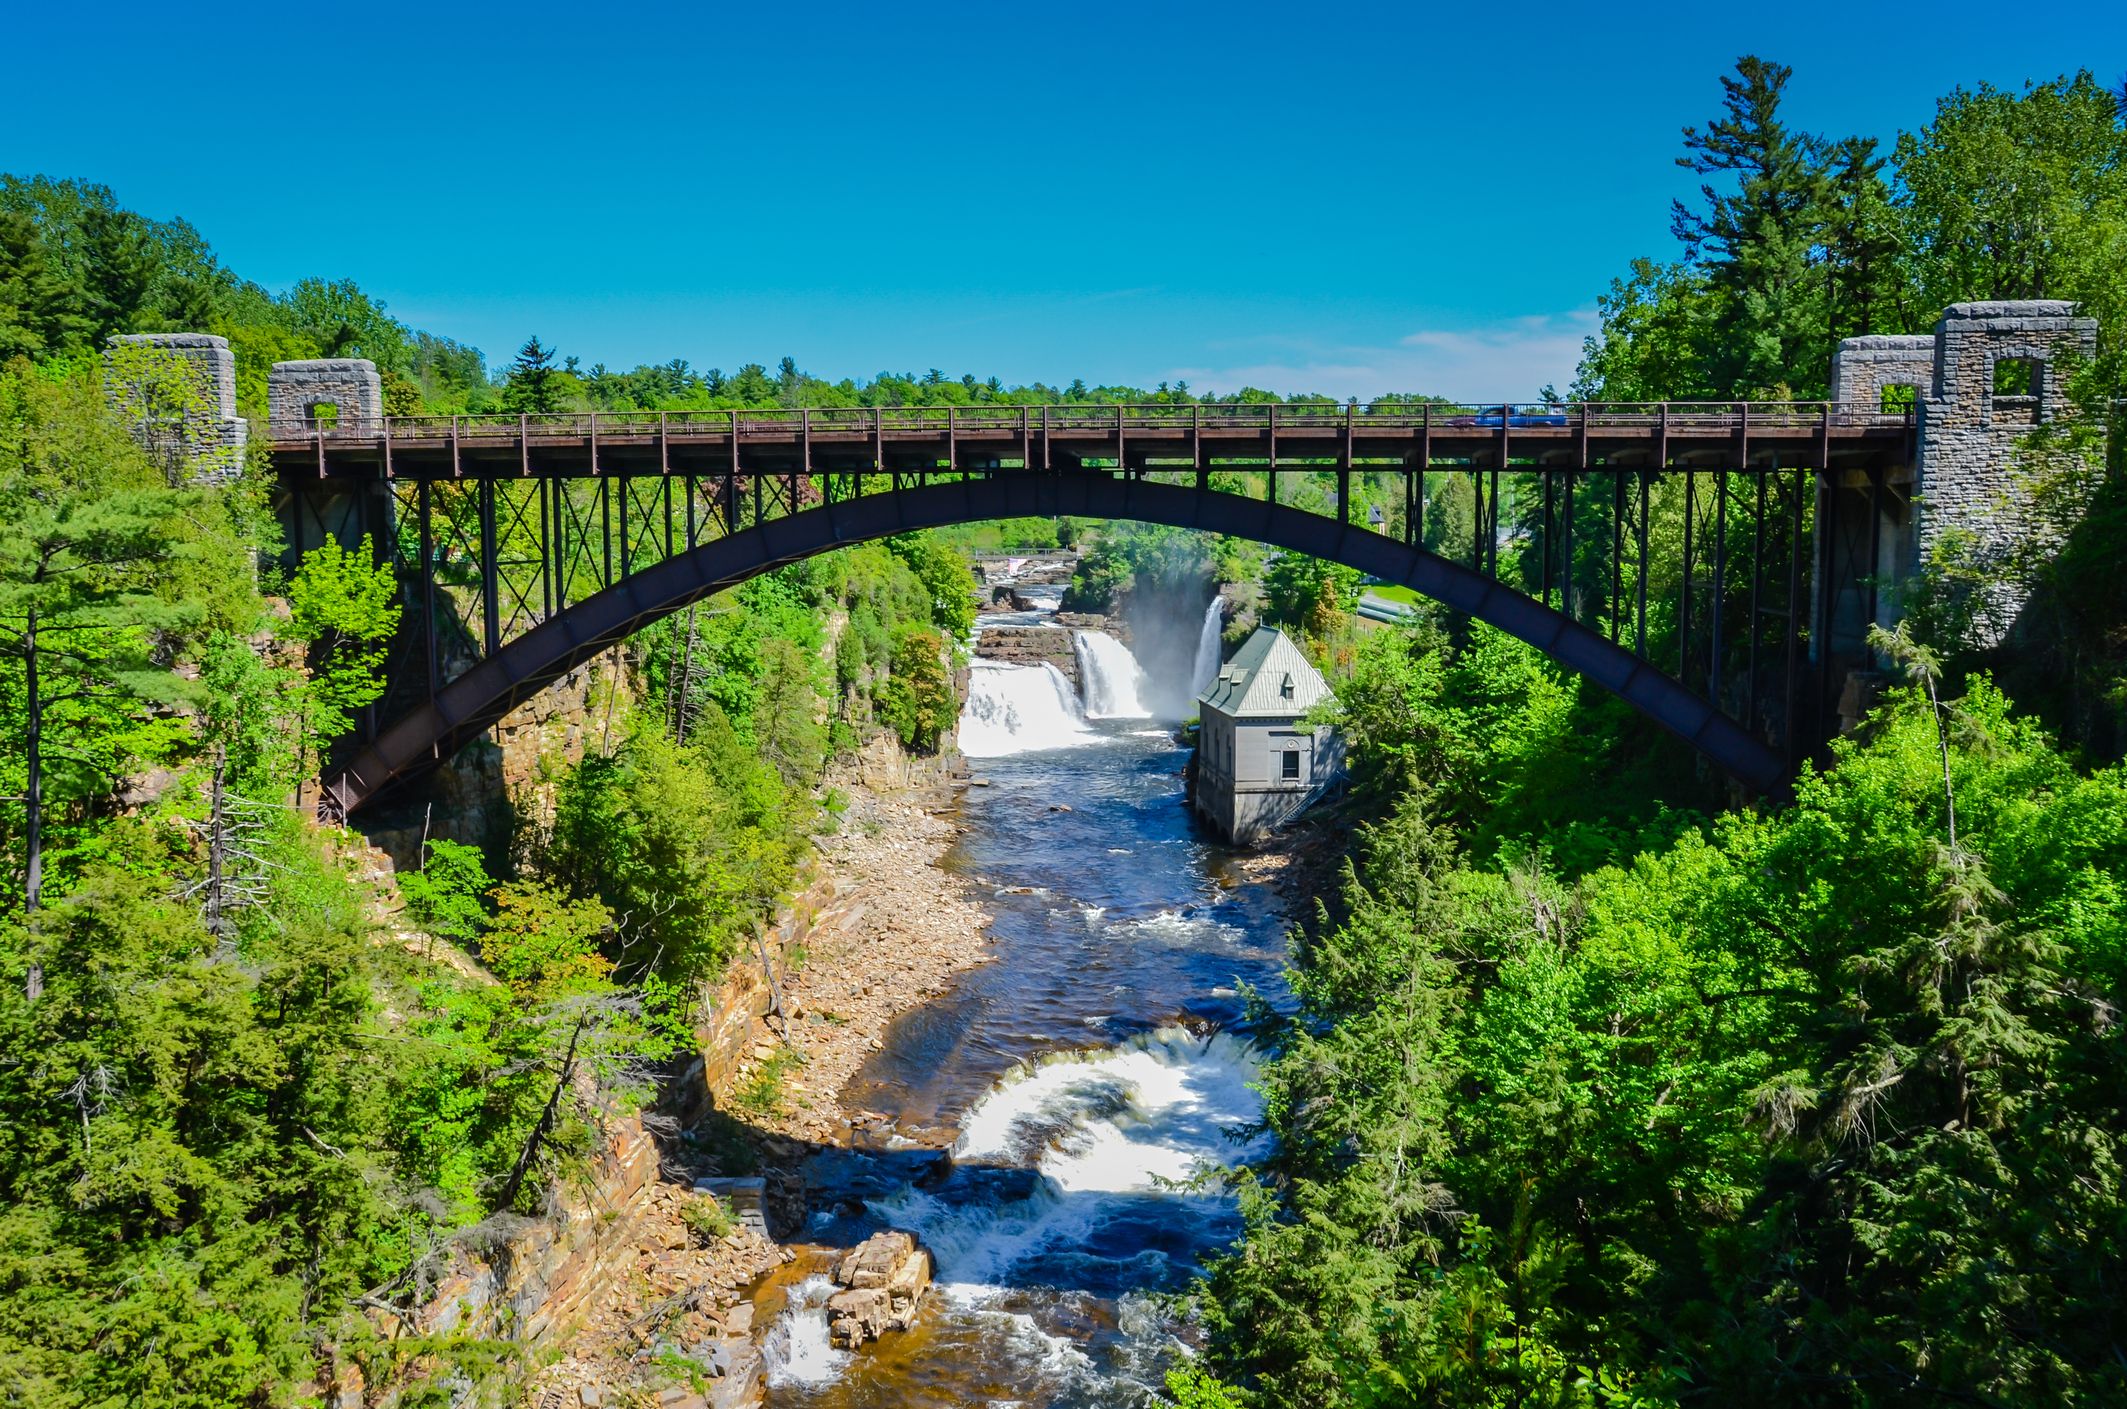 River Gorge in Ausable Charms, a tourist attraction in the Adirondacks Region of Upstate New York